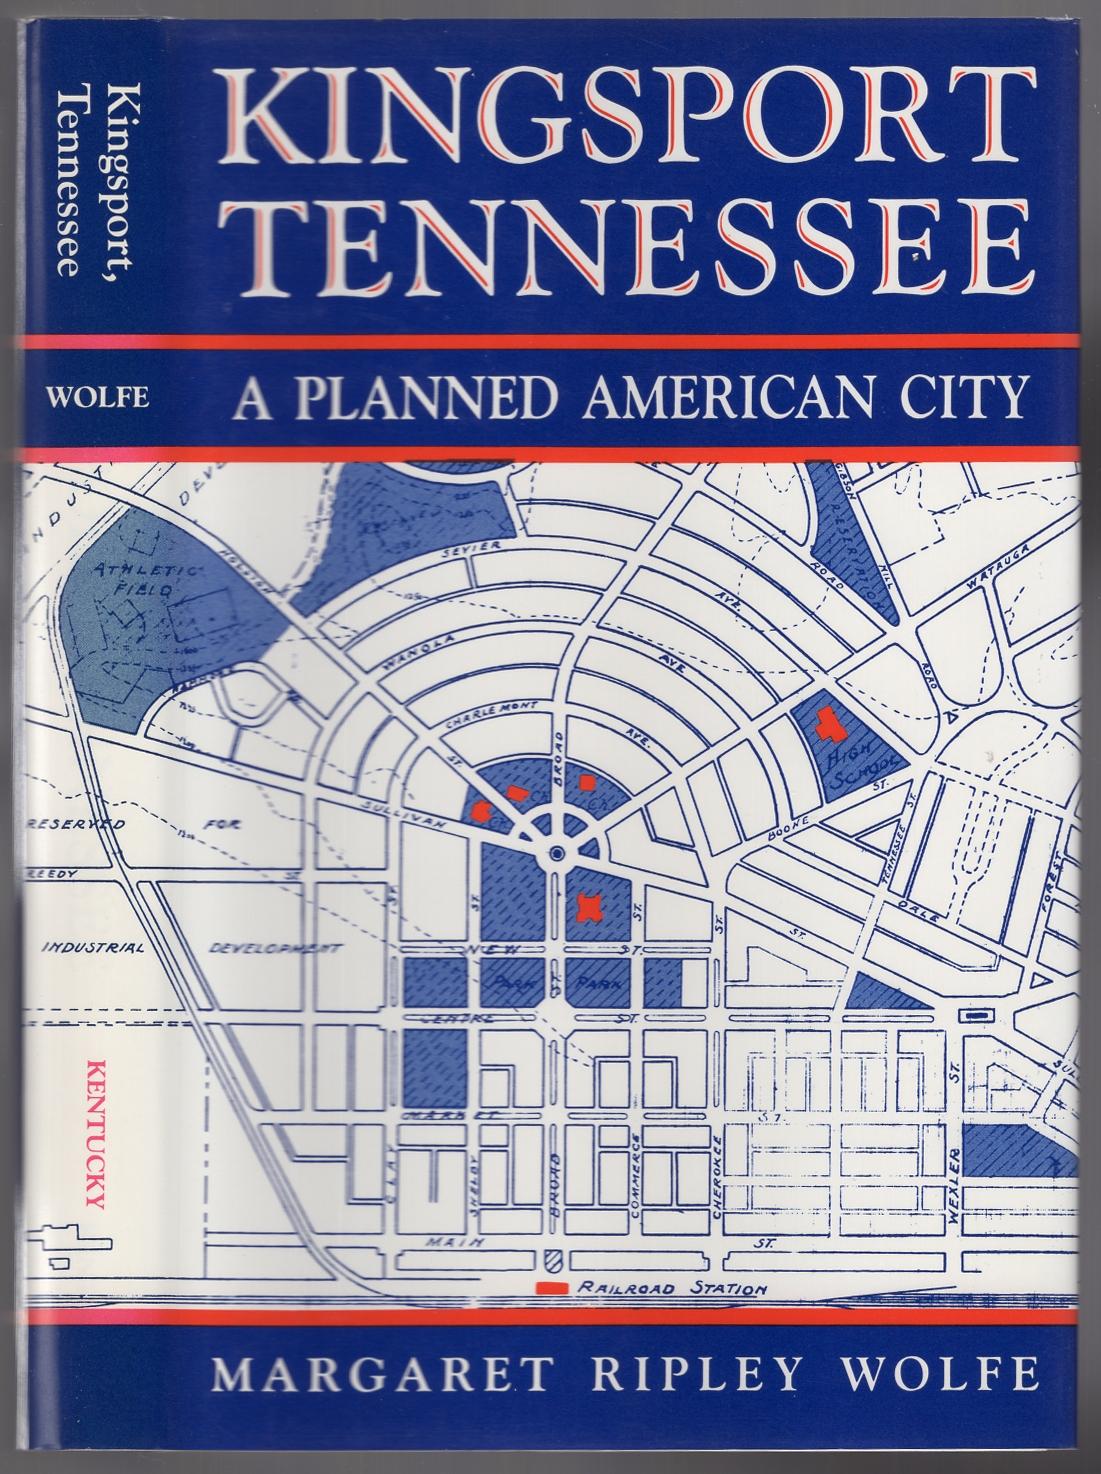 Kingsport, Tennessee: A Planned American City - WOLFE, Margaret Ripley